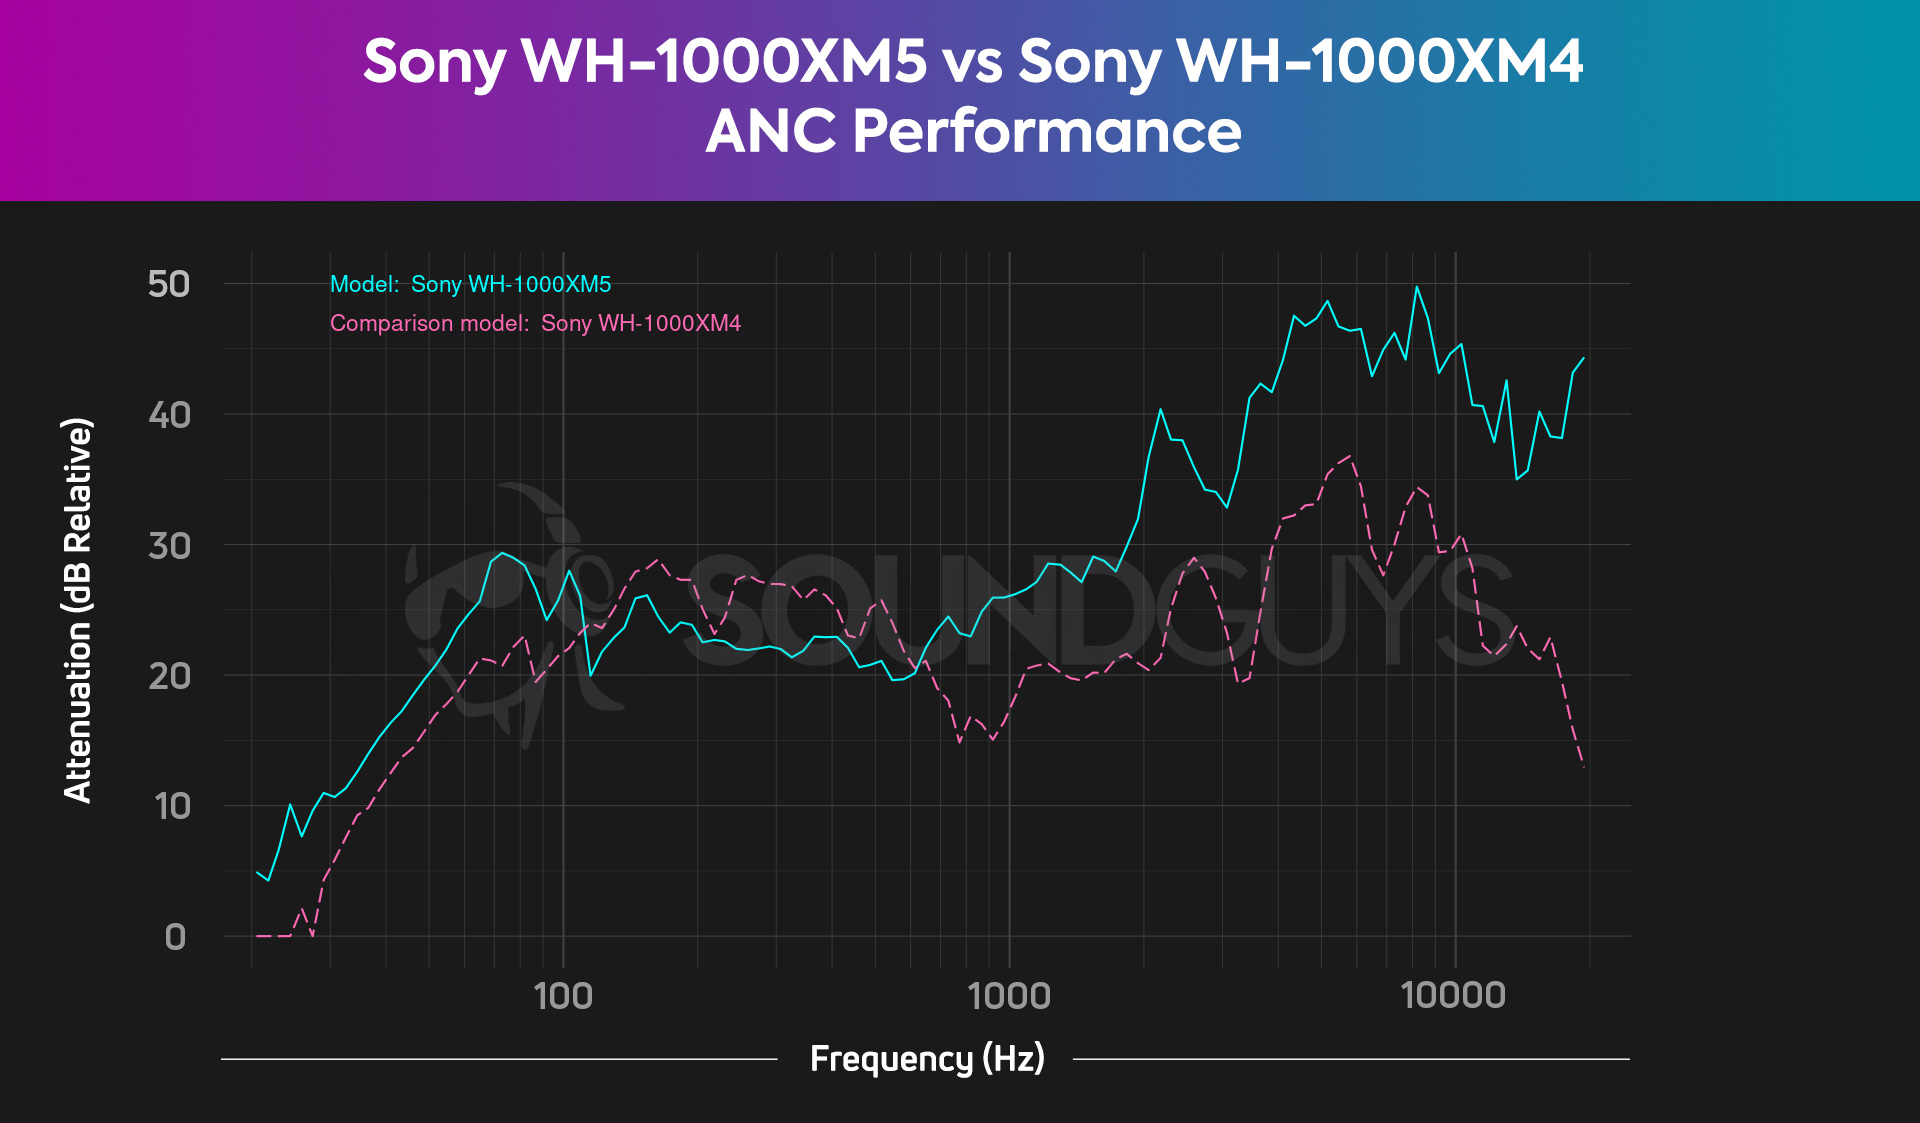 A chart compares the ANC performance of the Sony WH-1000XM4 and WH-1000XM5 Bluetooth headphones, revealing the XM5 to be the better pick in this regard.